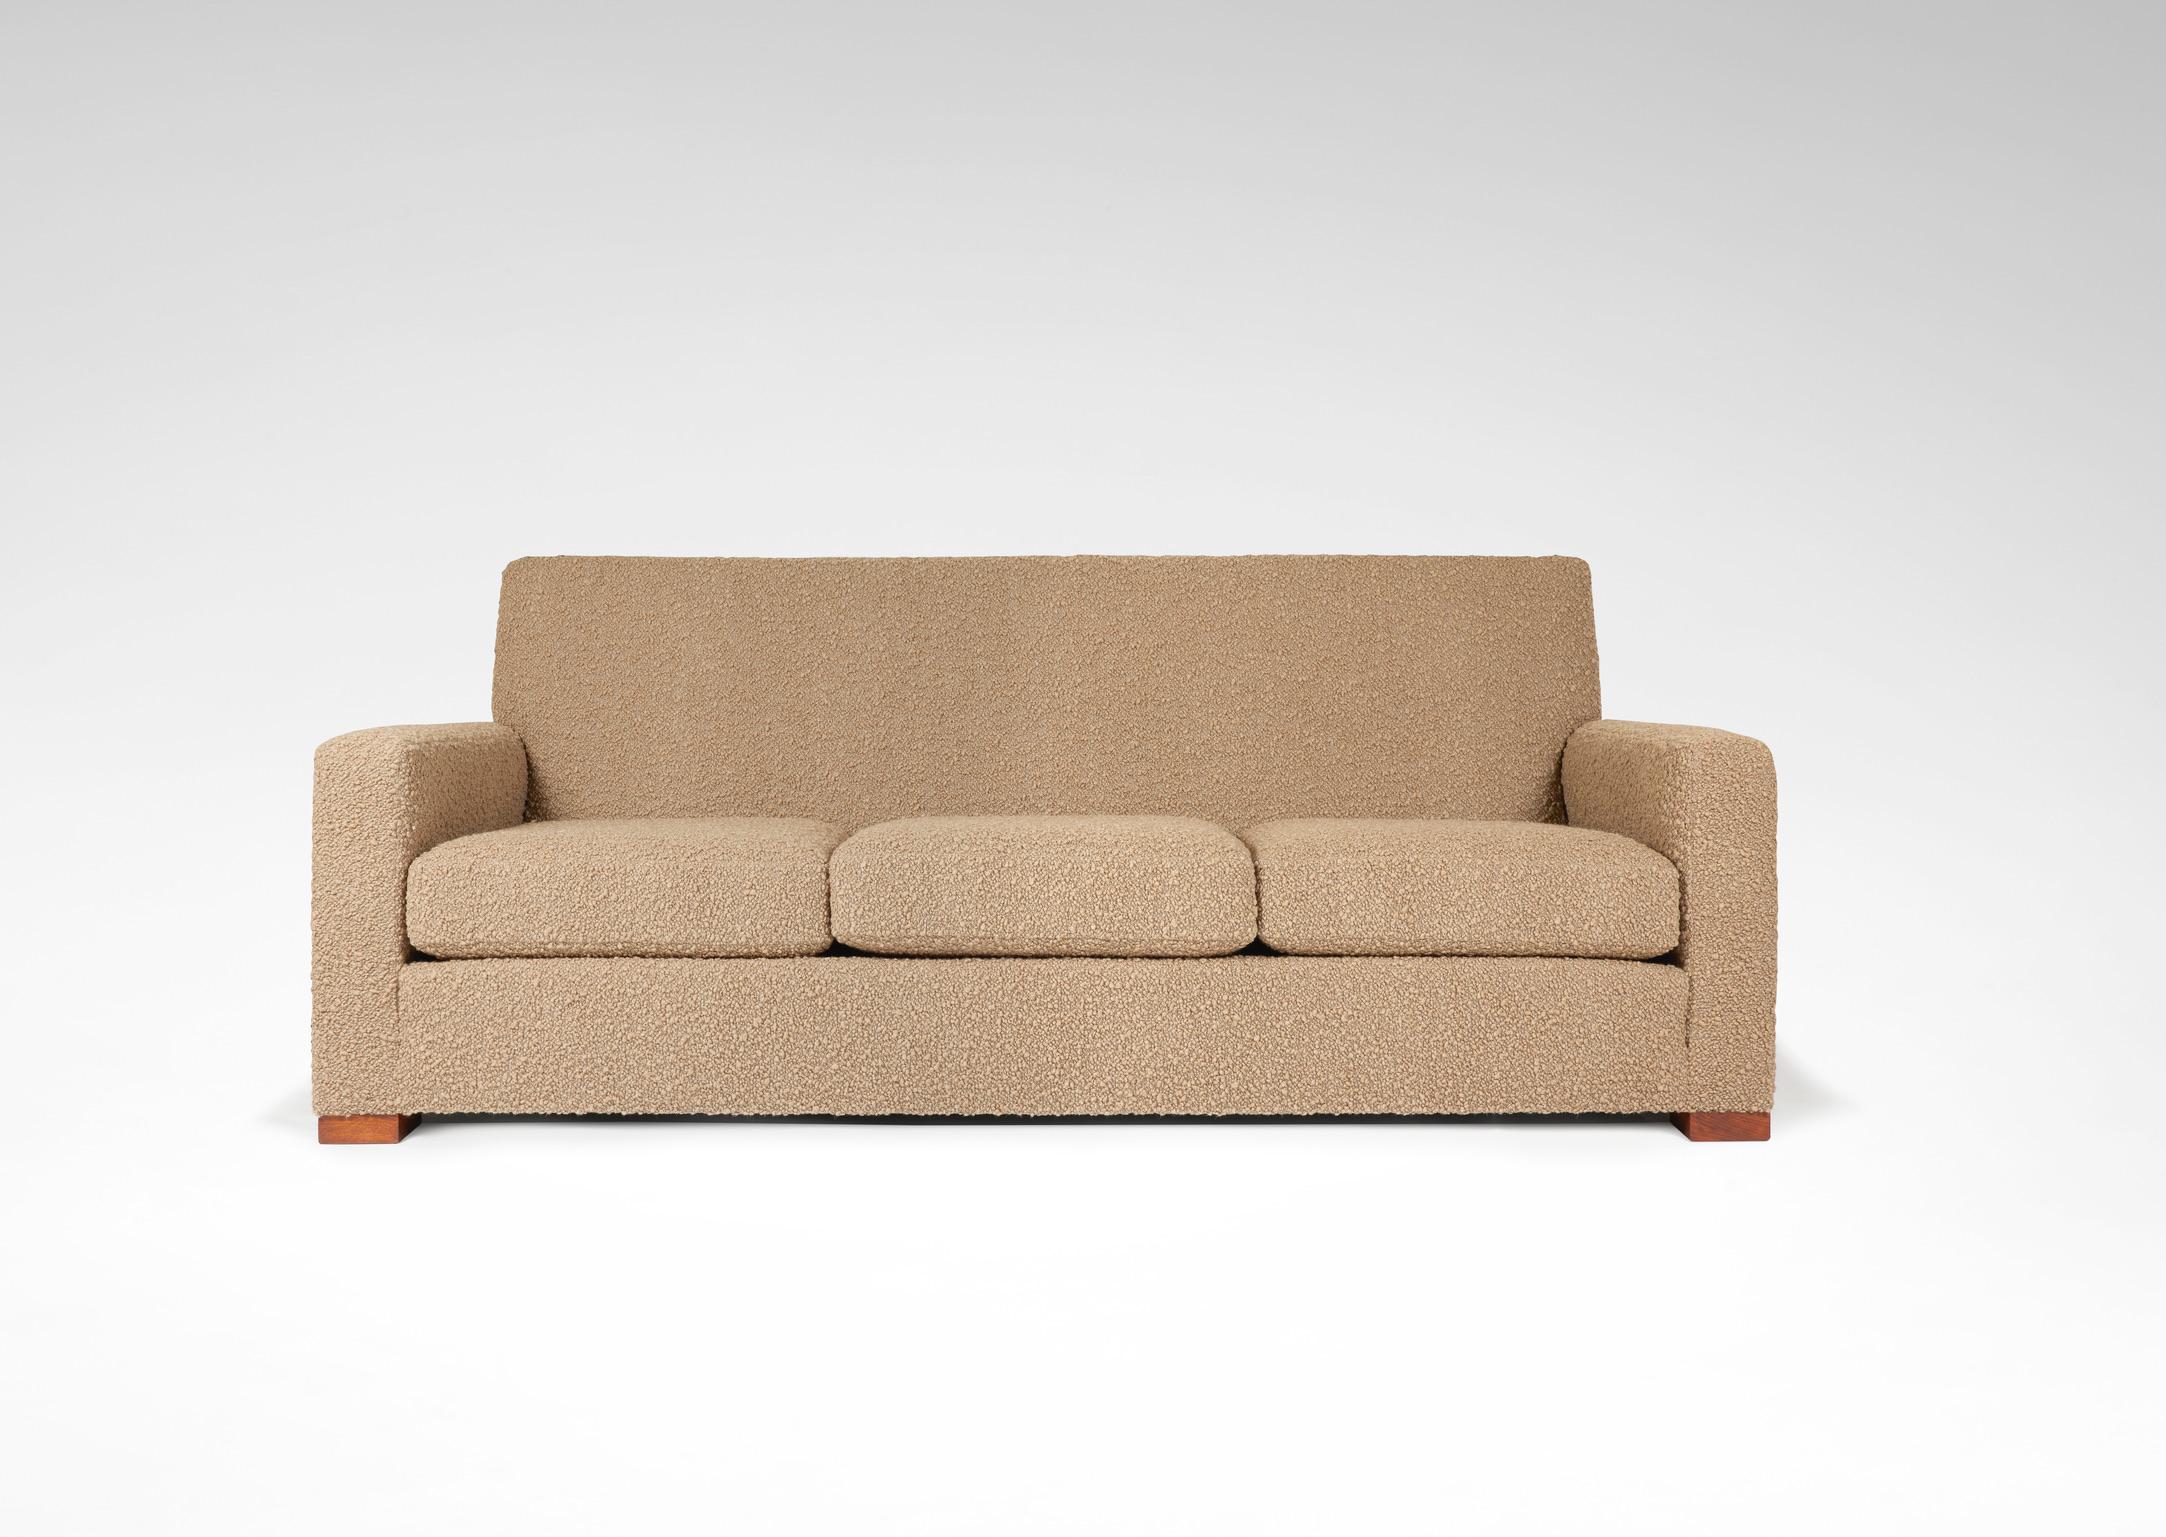 Set composed of a sofa and two armchairs covered with a light brown fabric bouclette. 
Parallelepipedic wooden legs and full straight armrests. 
Dimensions sofa : H. back : 86 cm ; L. : 210 cm ; Pr. : 90 cm.
Dimensions armchairs : H. back : 86 cm